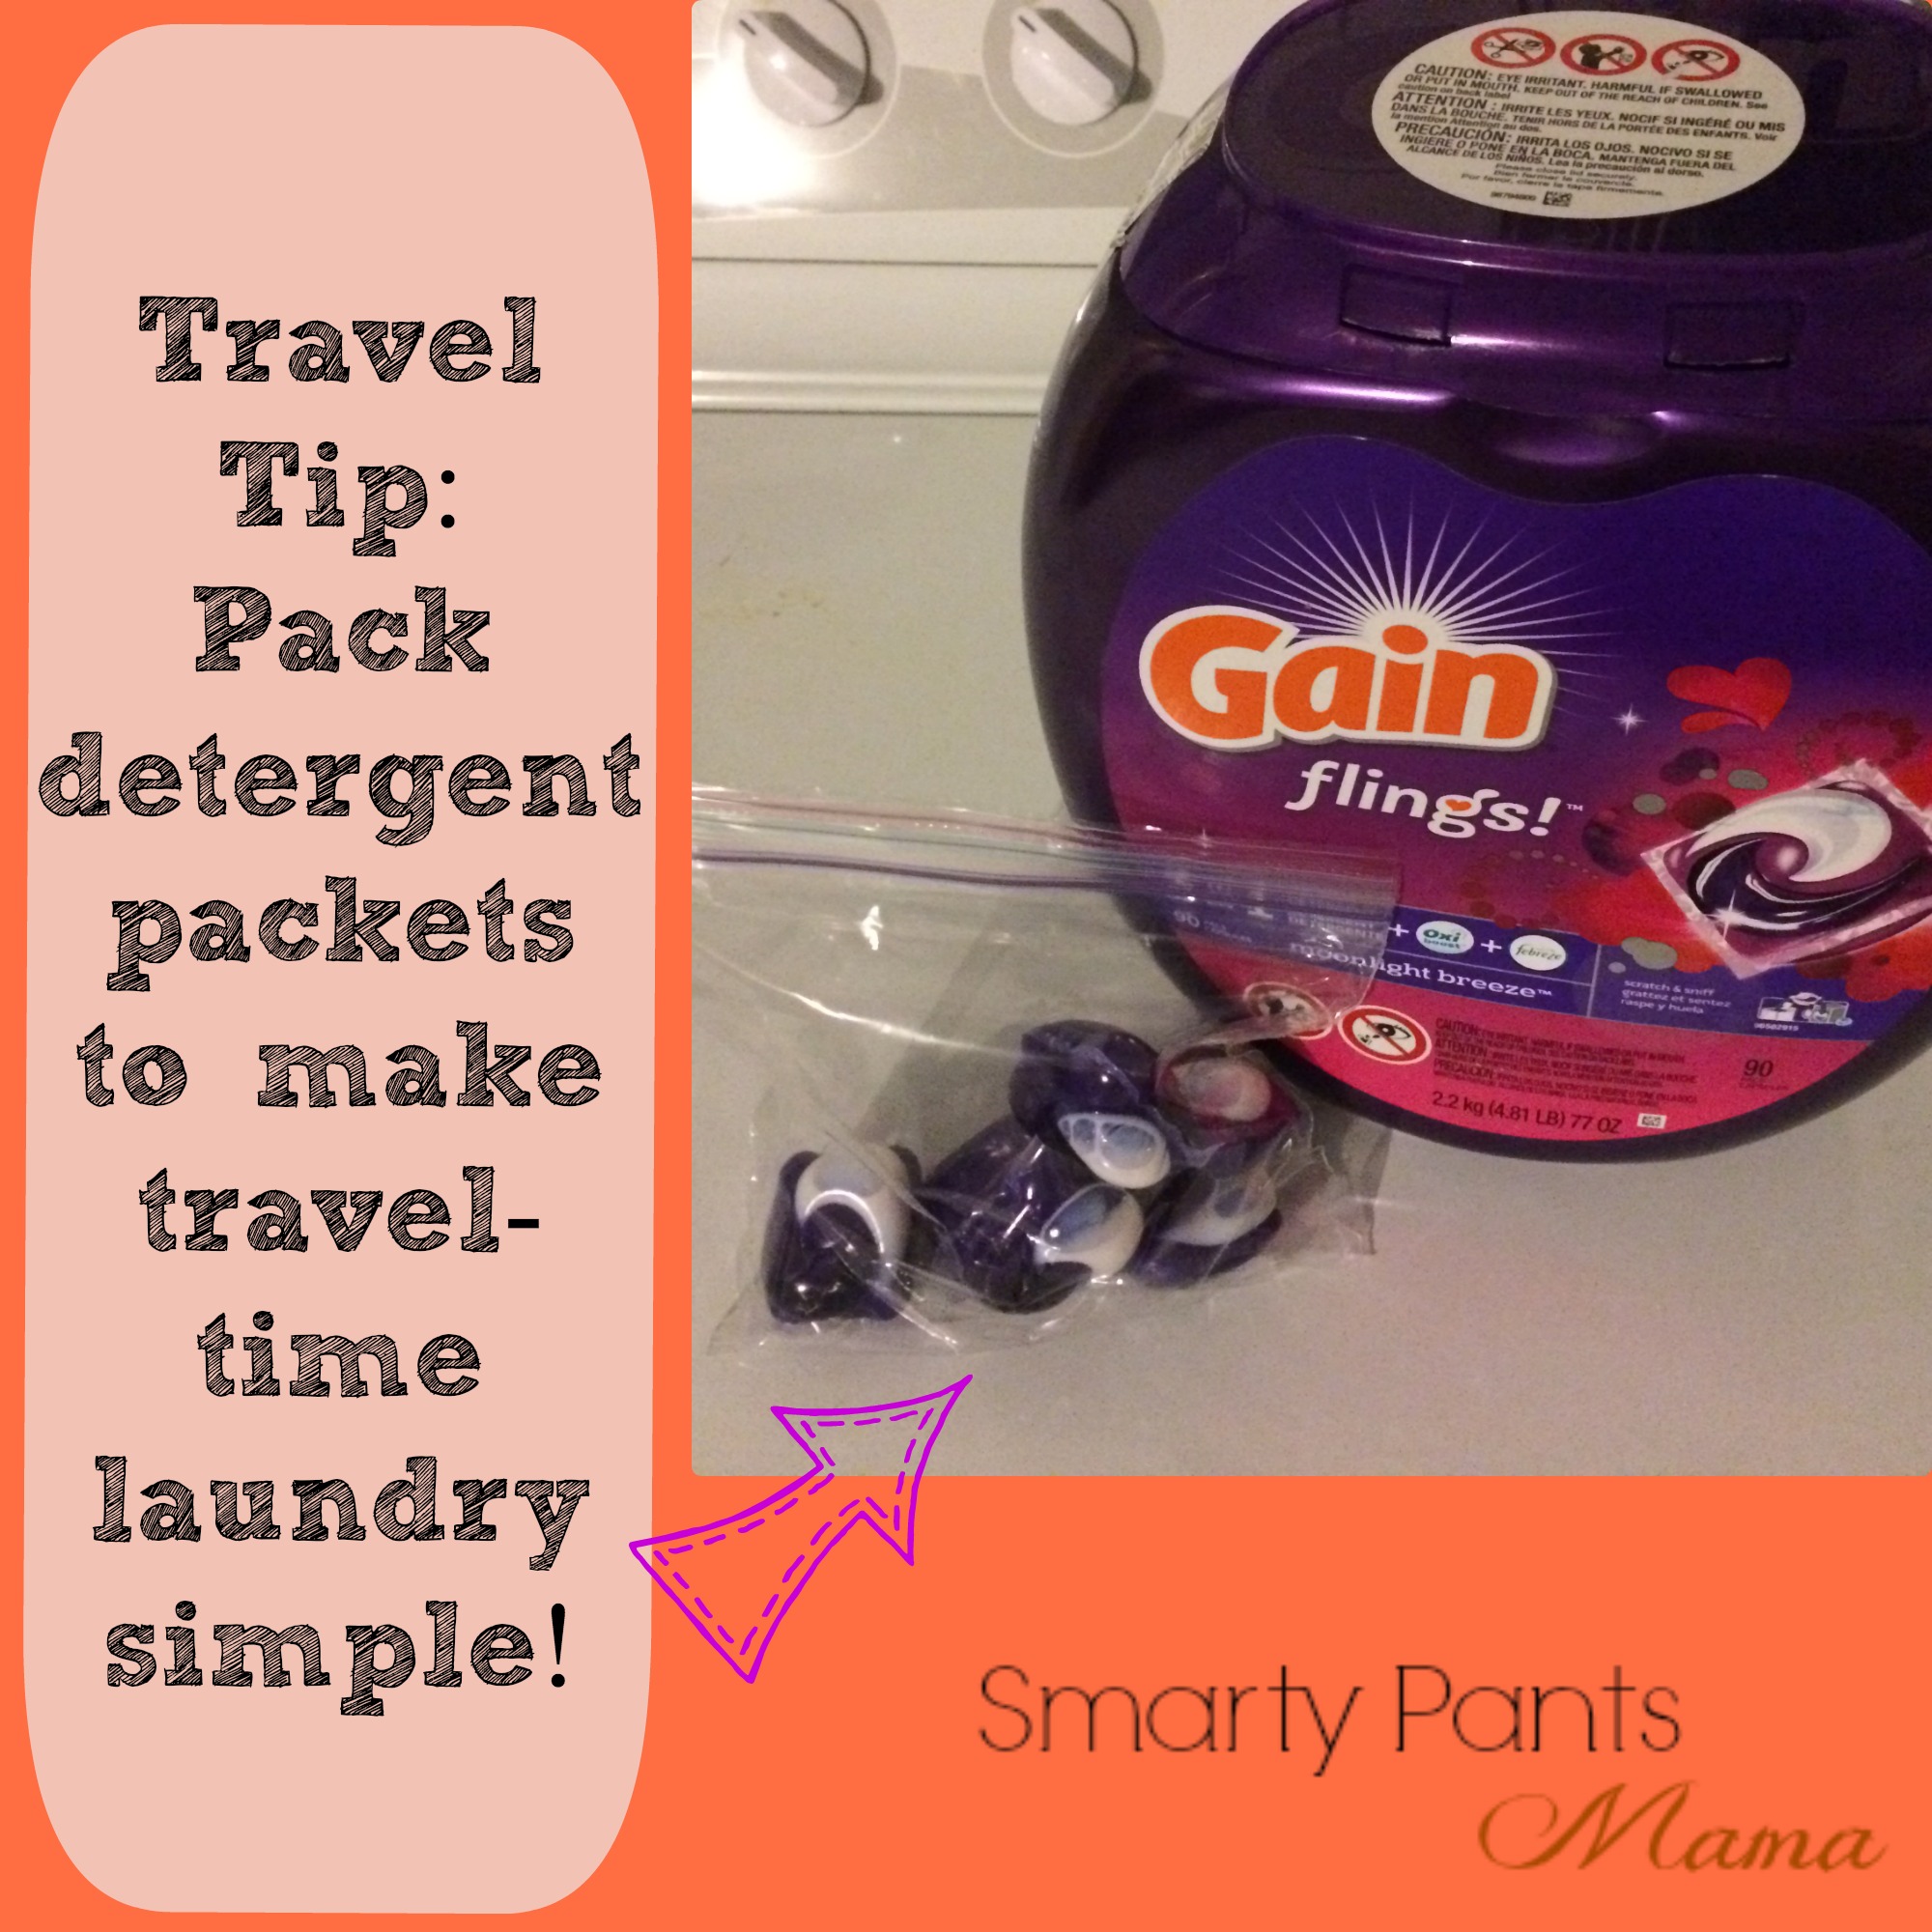 What laundry detergent when traveling is best?